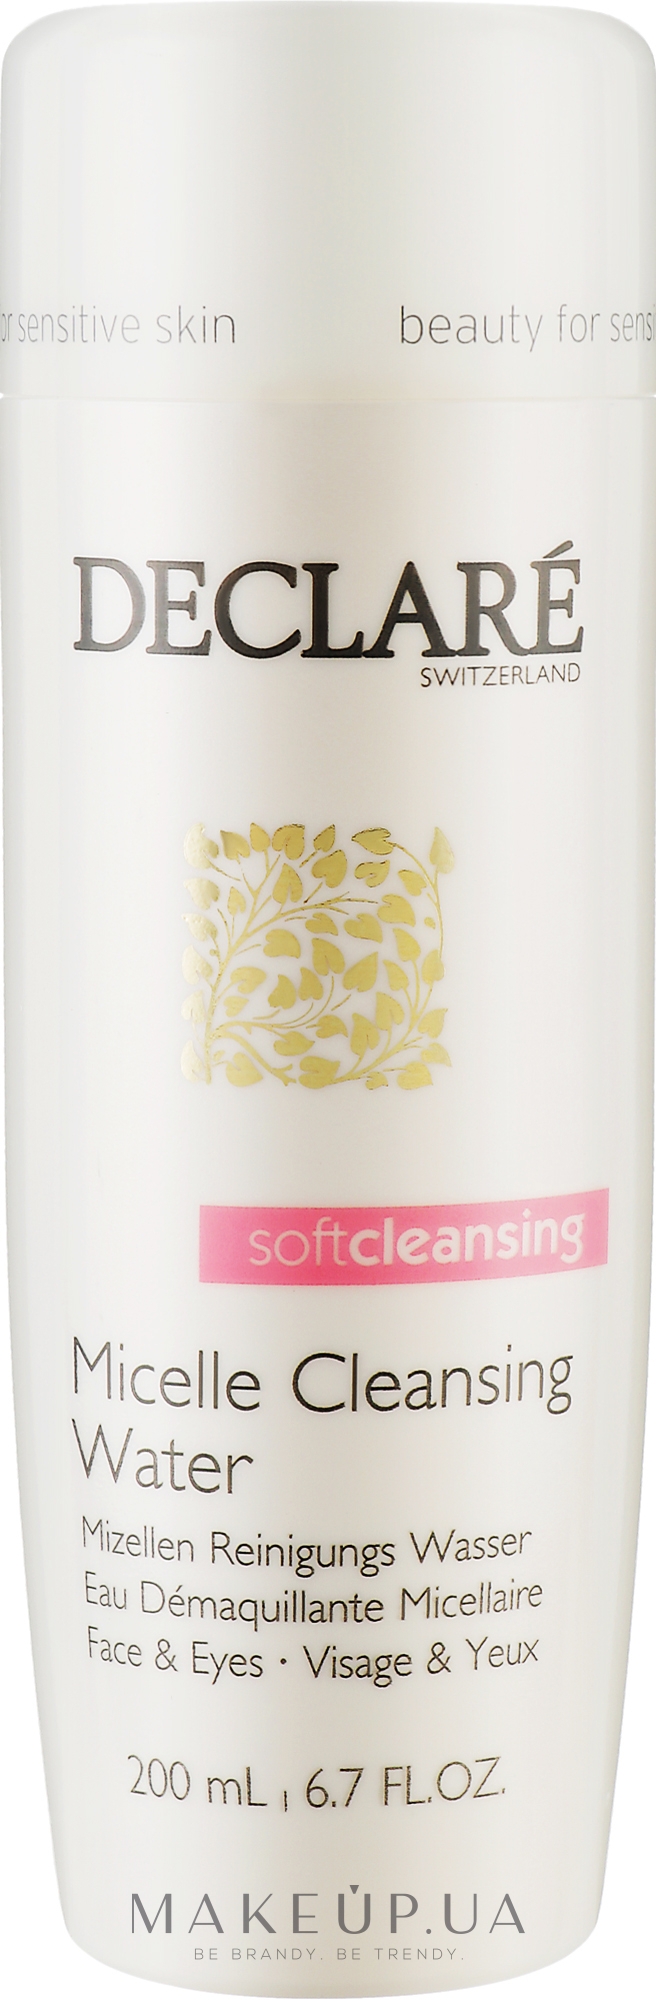 Міцелярна вода  - Declaré Soft Cleansing Micelle Cleansing Water — фото 200ml